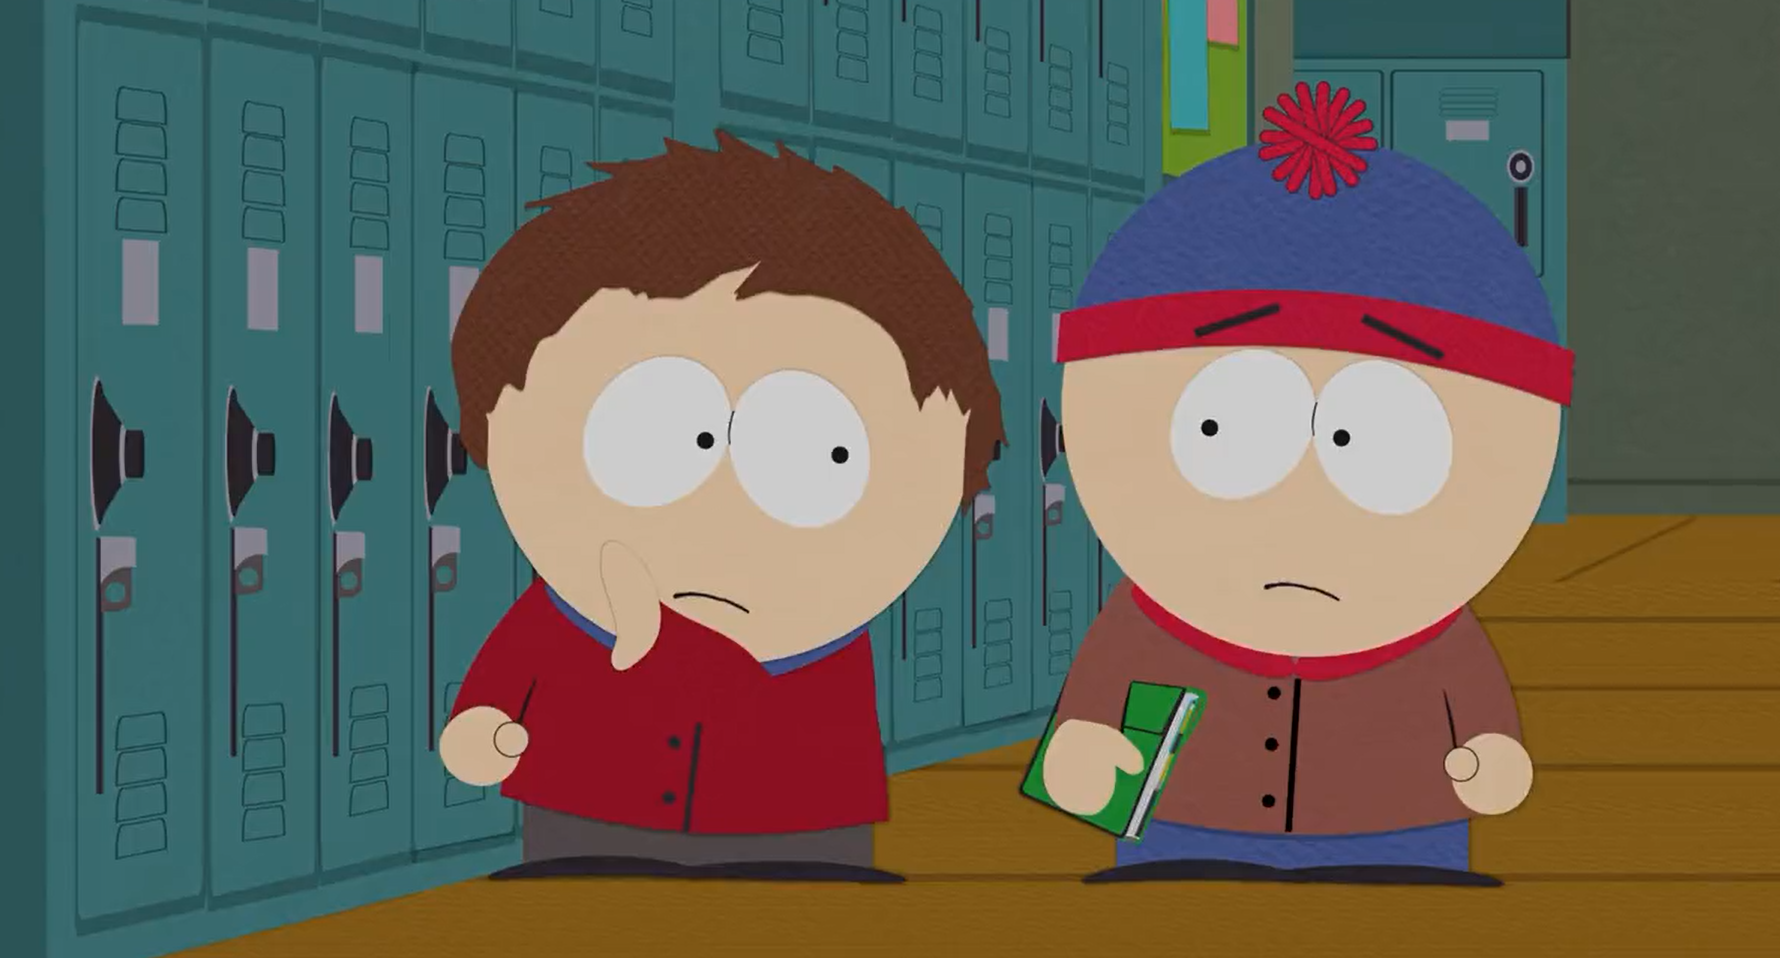 South Park Creators Use ChatGPT To Co-Write Episode About AI